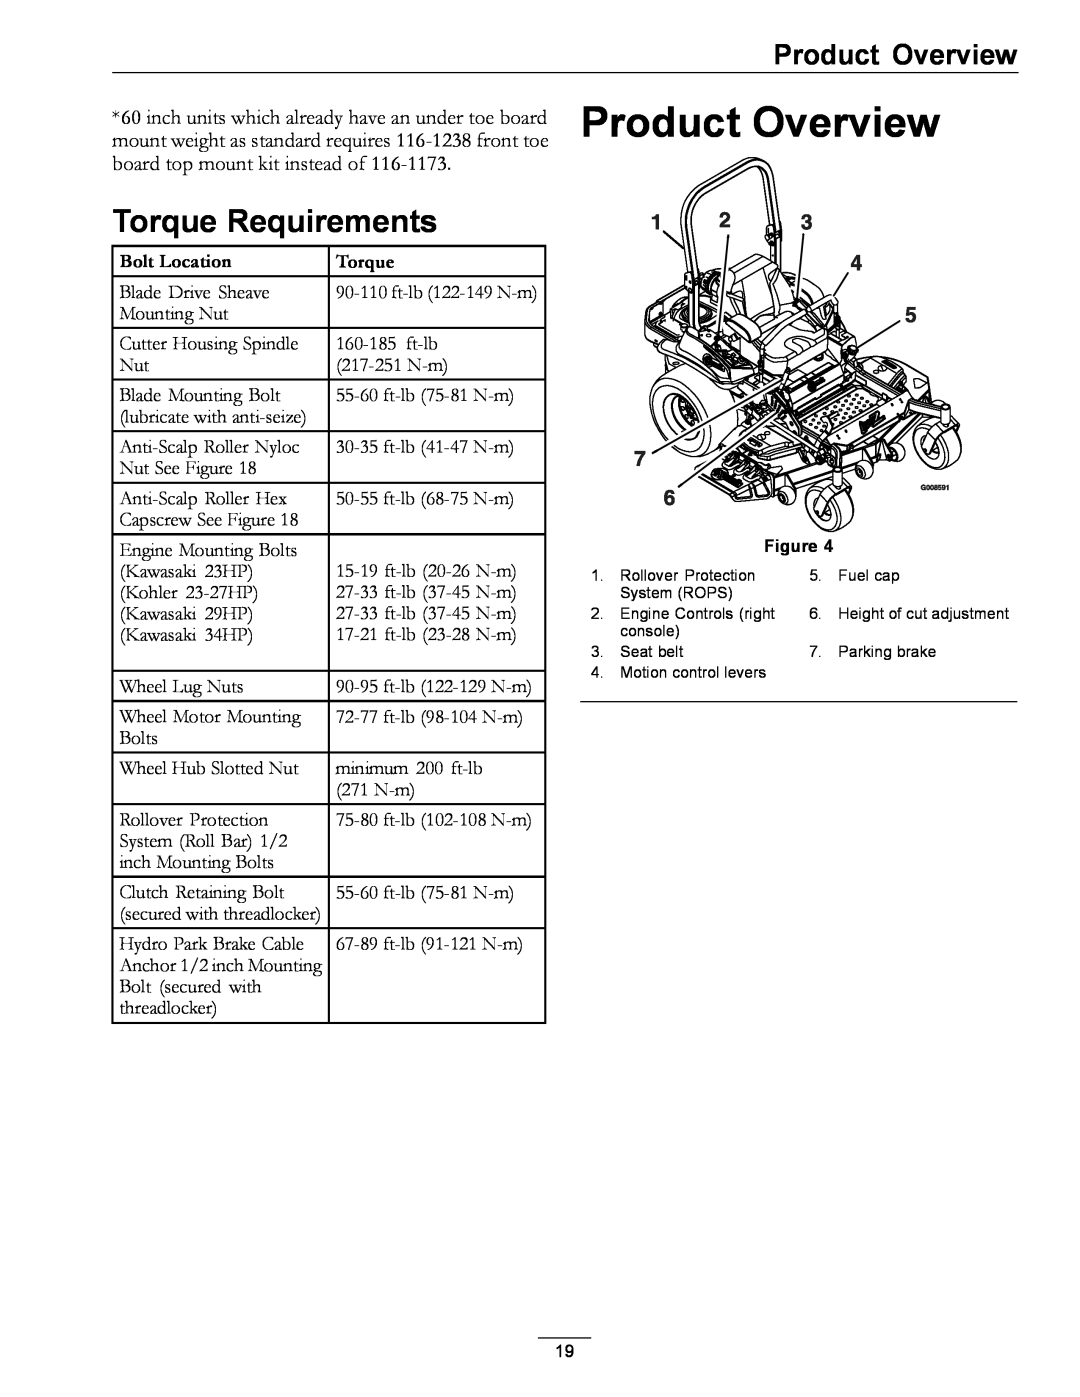 Exmark 4500-507 manual Product Overview, Torque Requirements, Bolt Location 